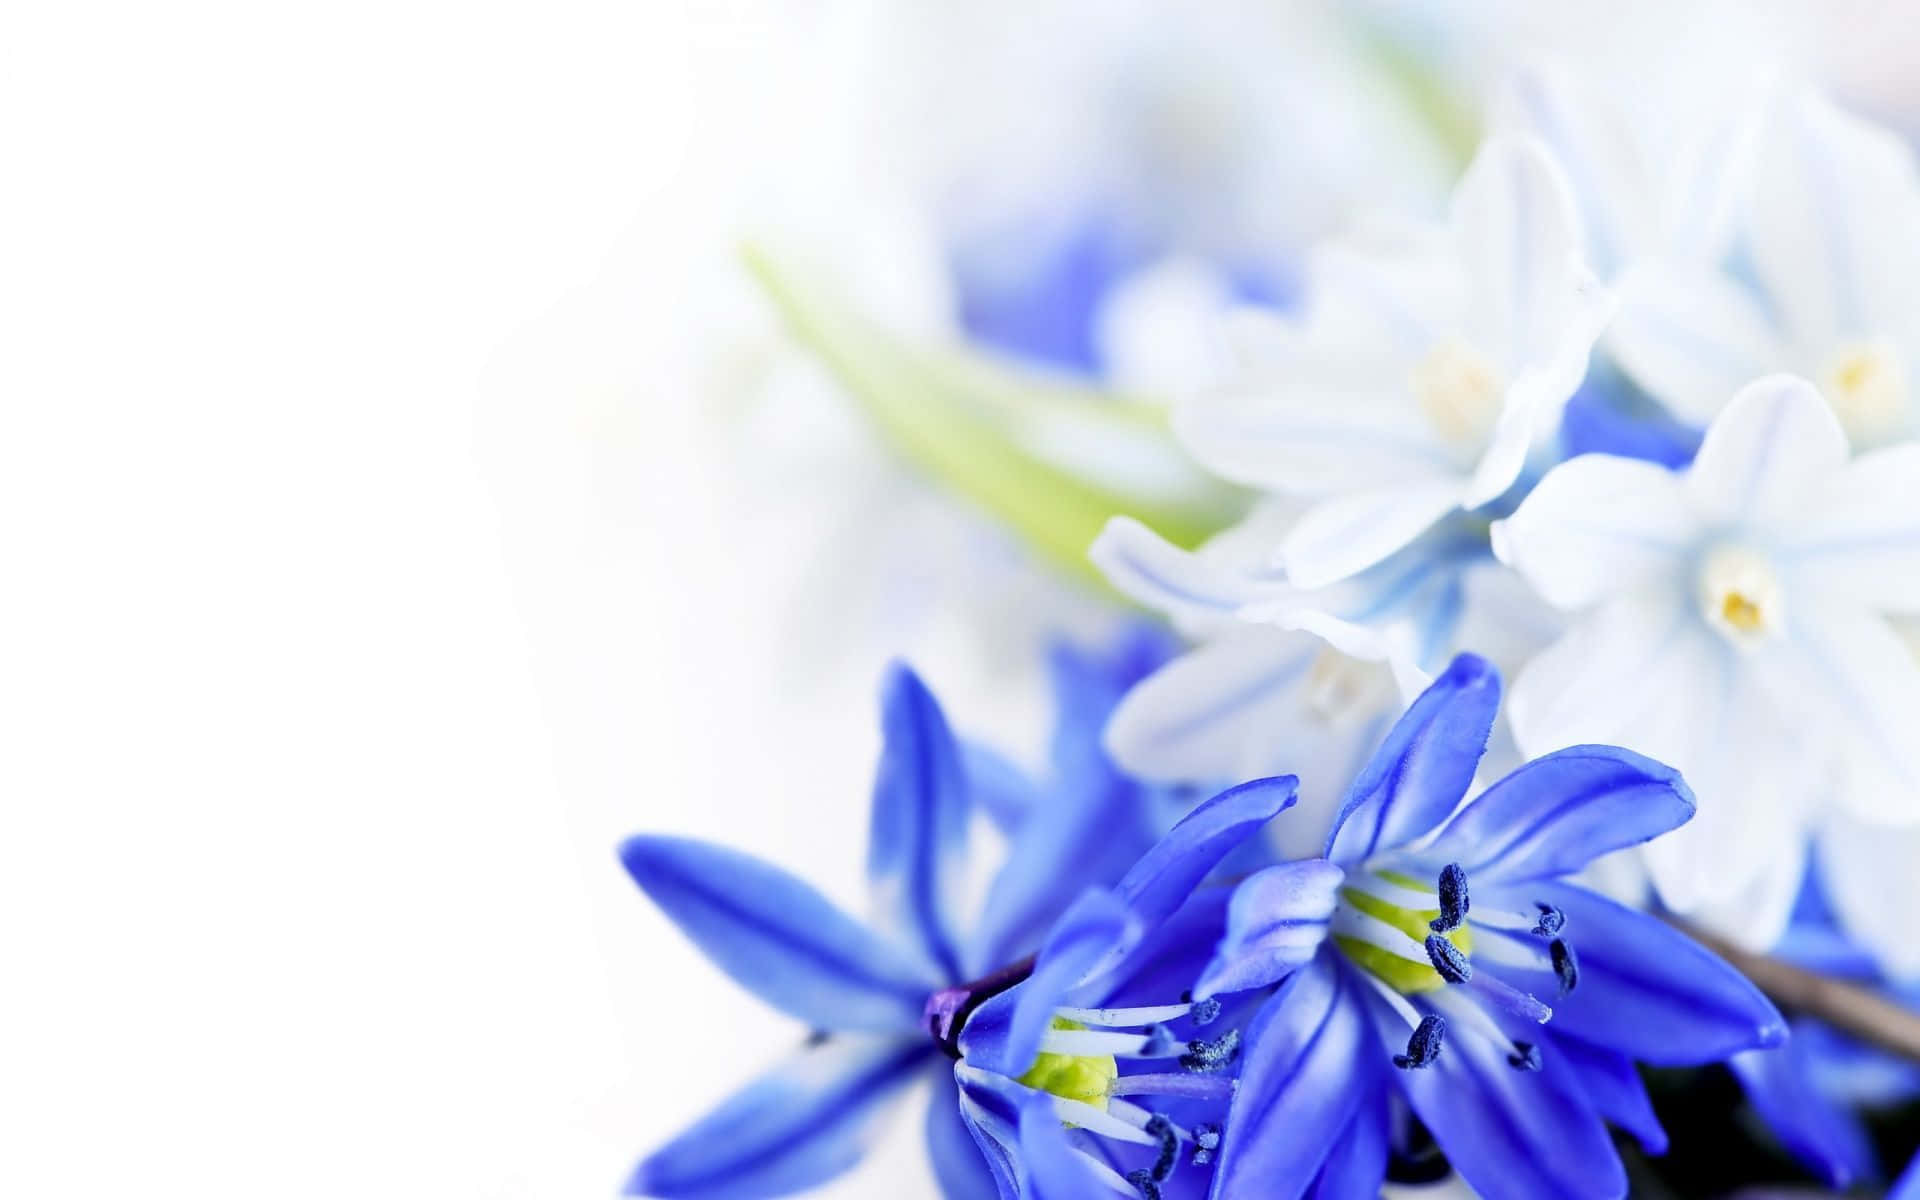 "Vibrant Blue Floral Bliss - a Background that Pops"